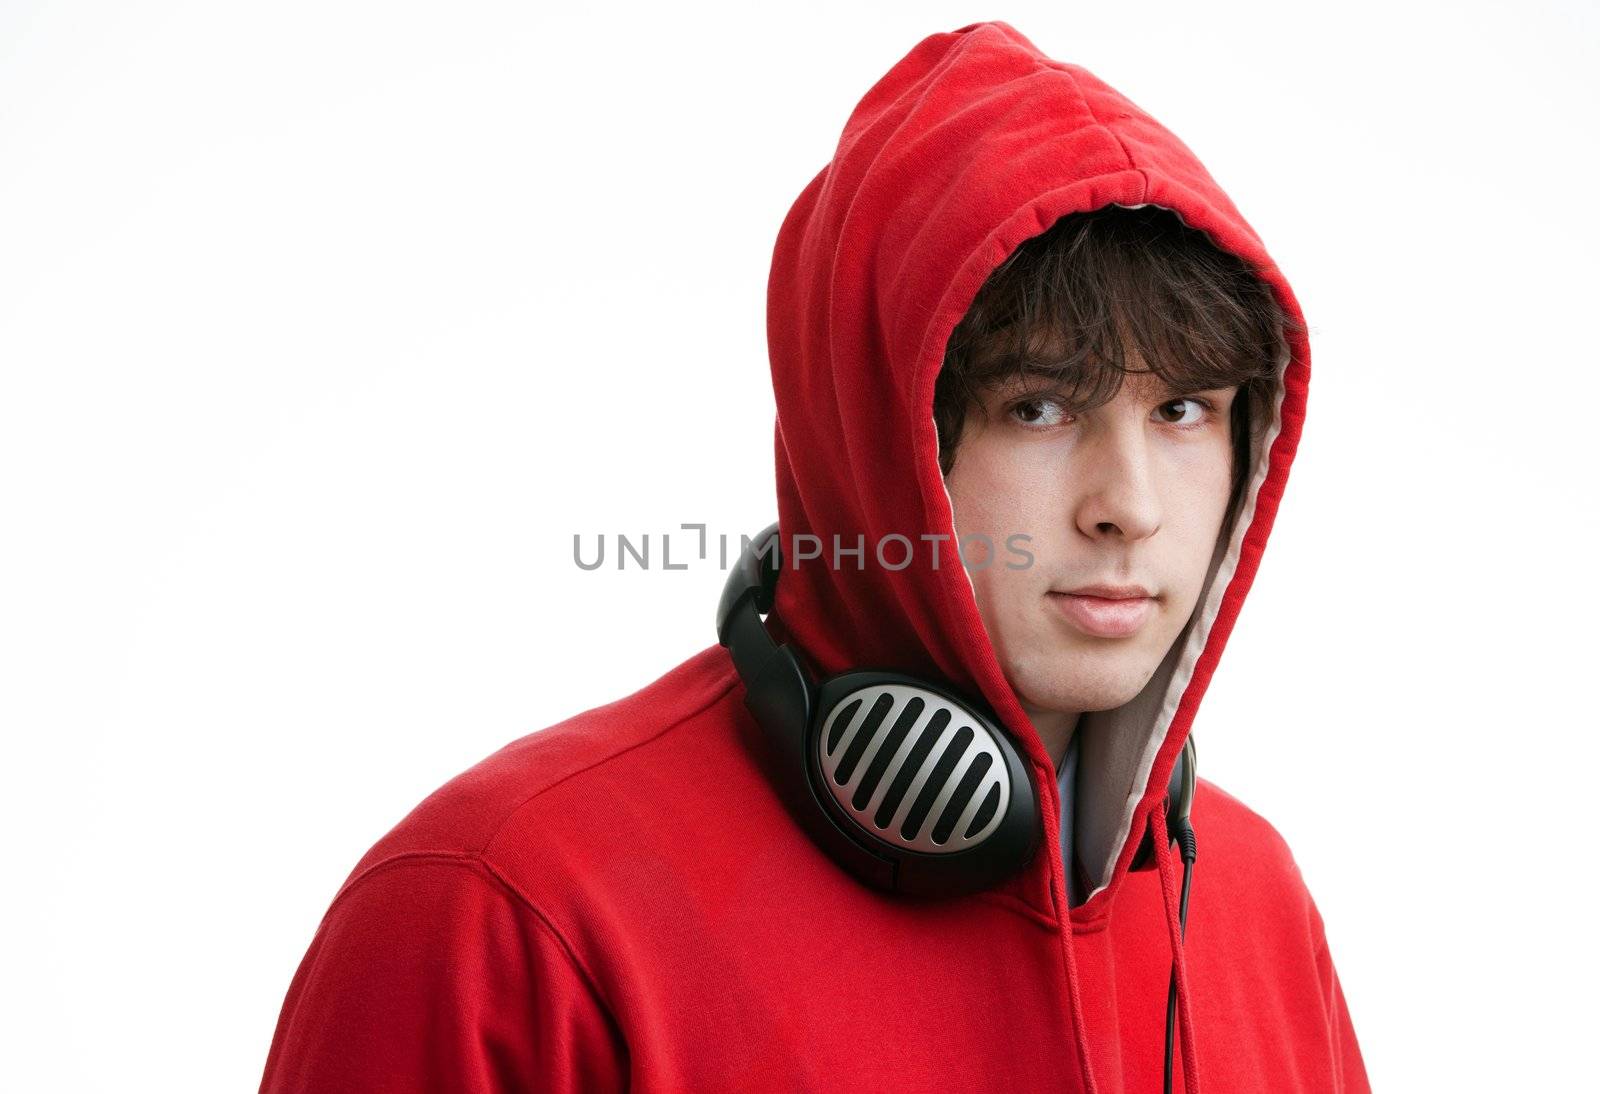 An image of a young man with headphones